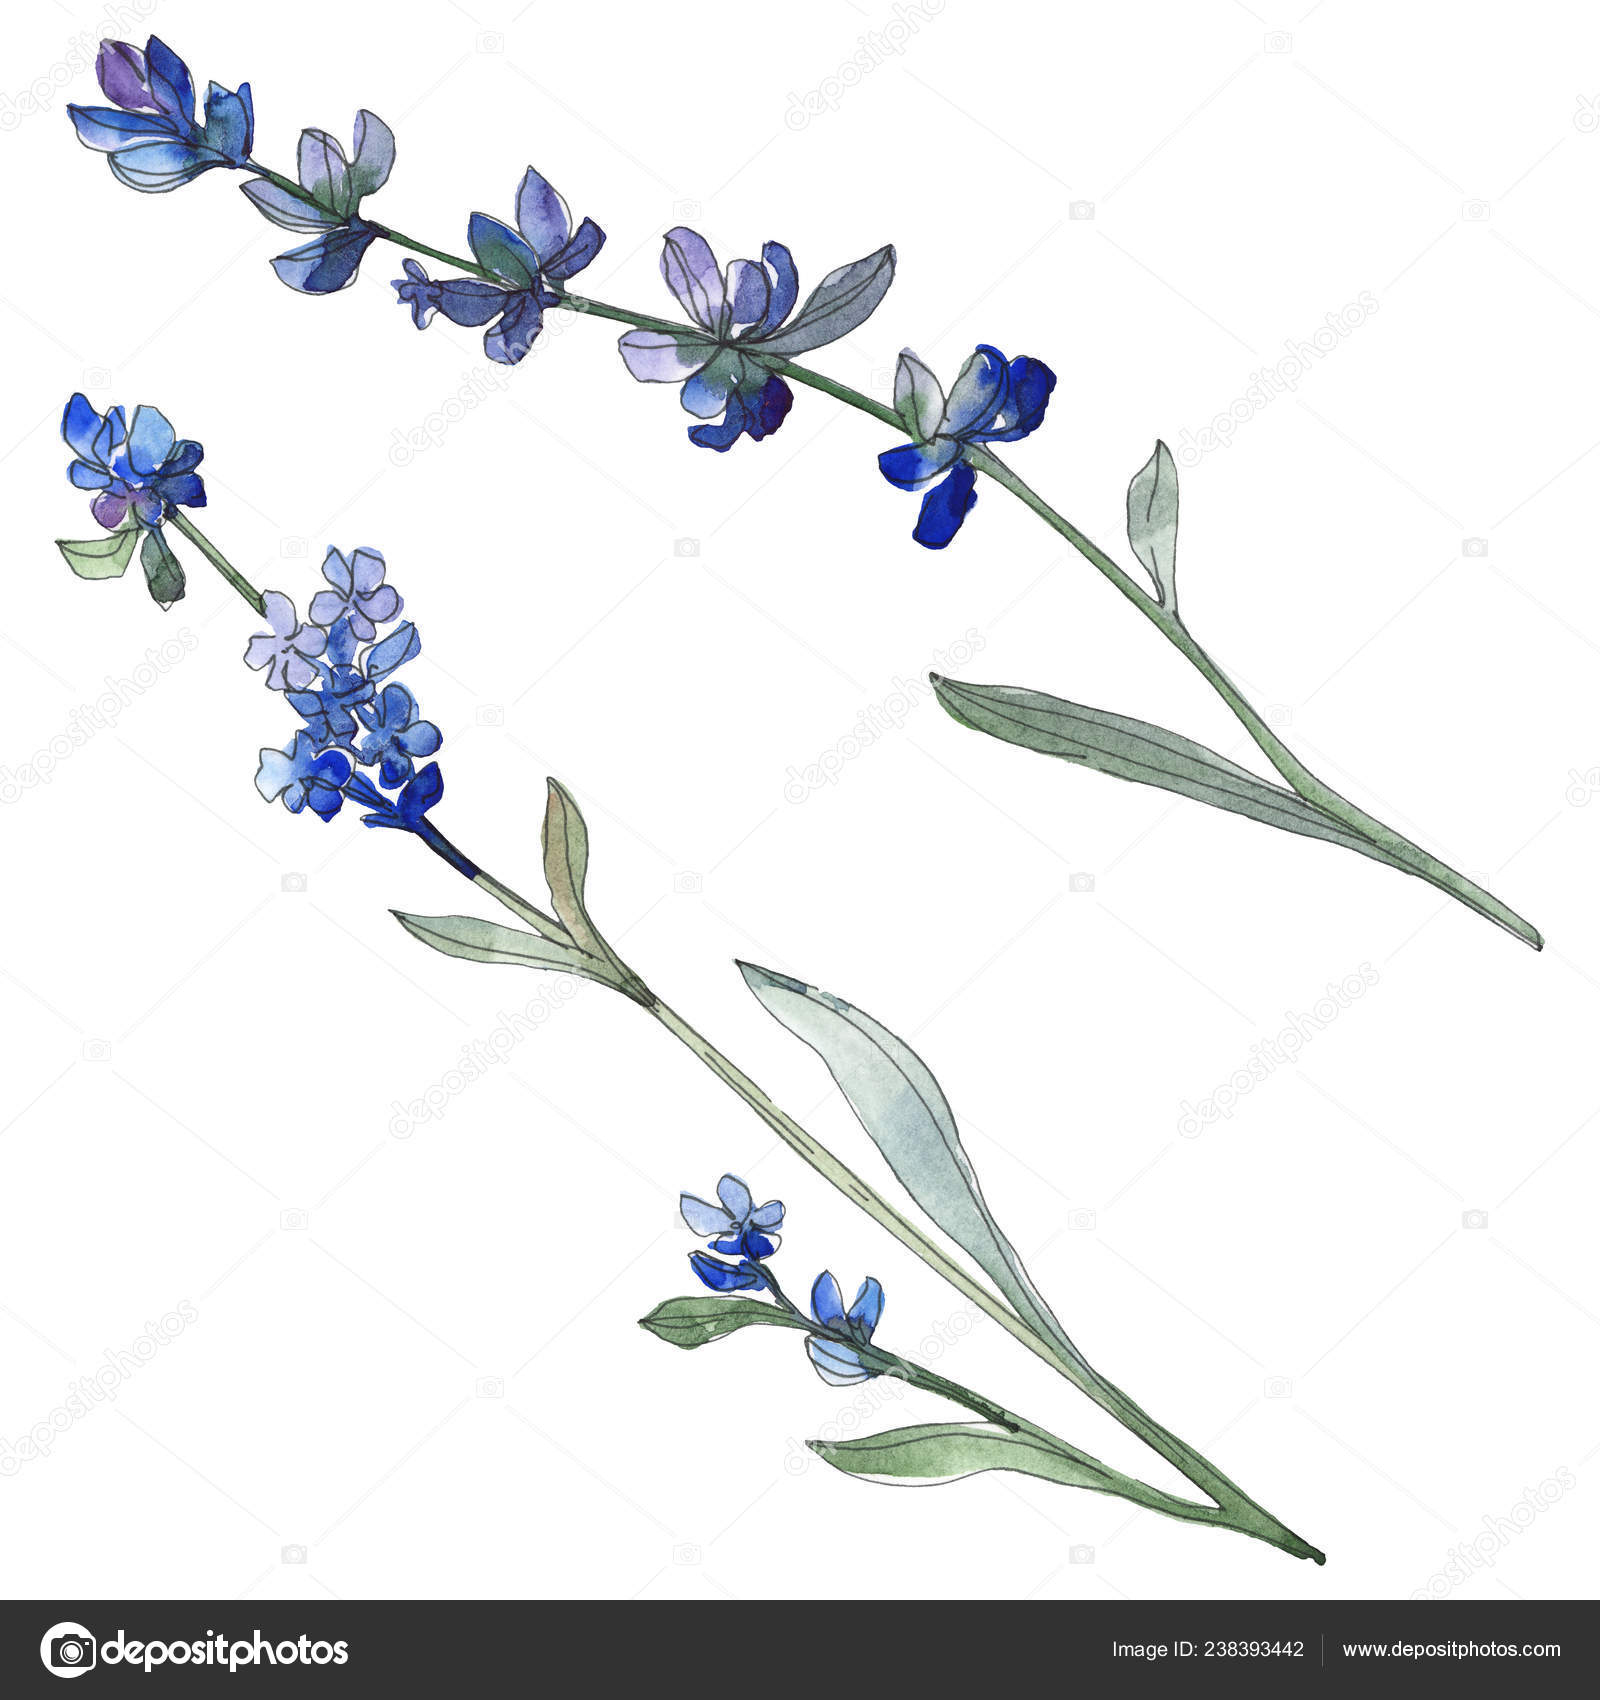 Purple Lavender Floral Botanical Flower Wild Spring Leaf Wildflower Isolated Stock Photo By C Andreyanush